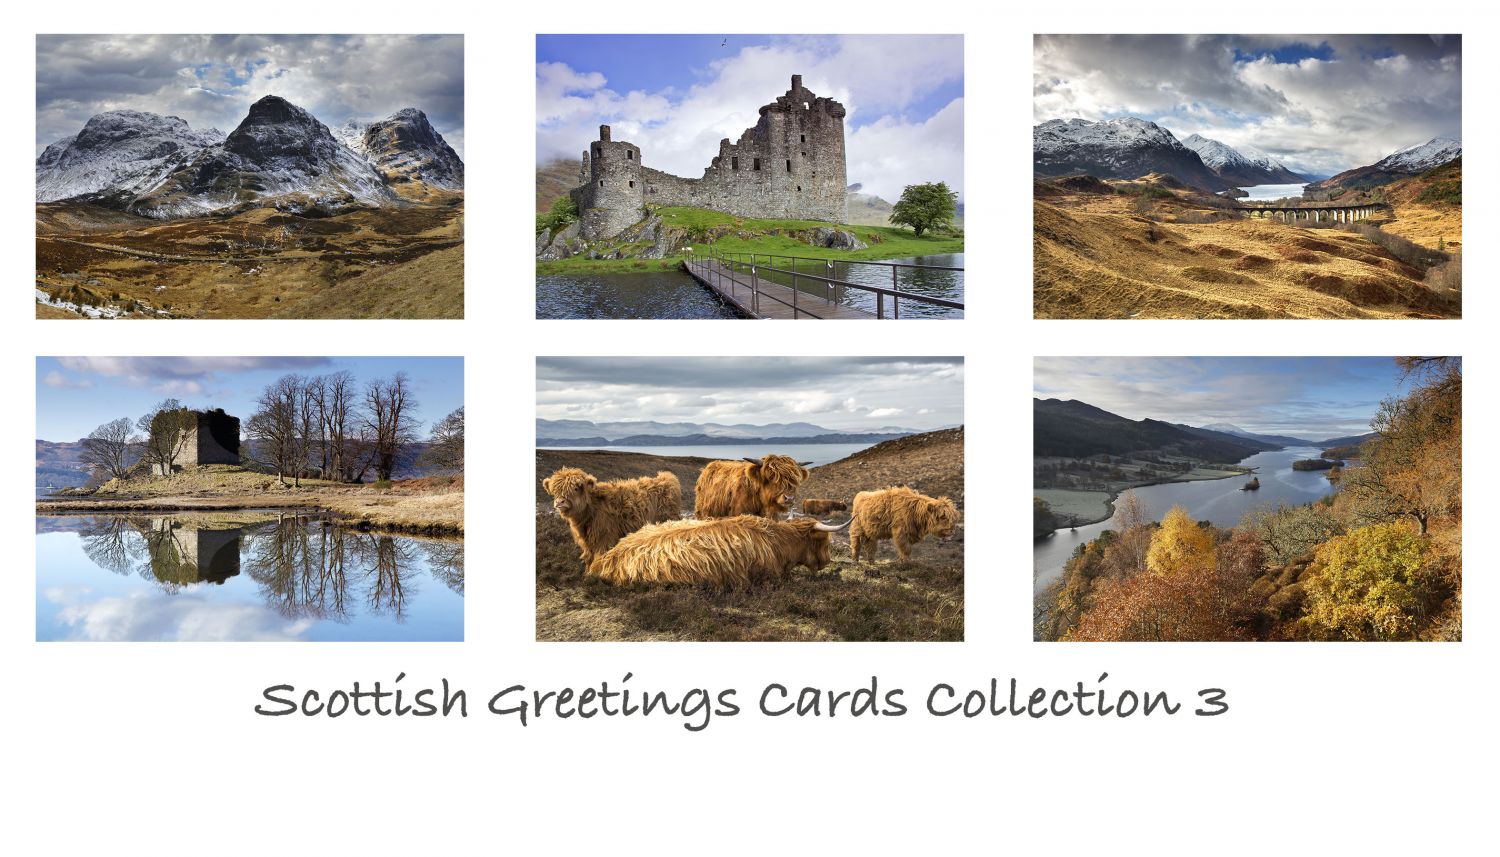 A pack of 6 Scottish Greeting cards featuring stunning images of some of Scotland’s most famous locations including Glencoe, Torridon and Kilchurn Castle